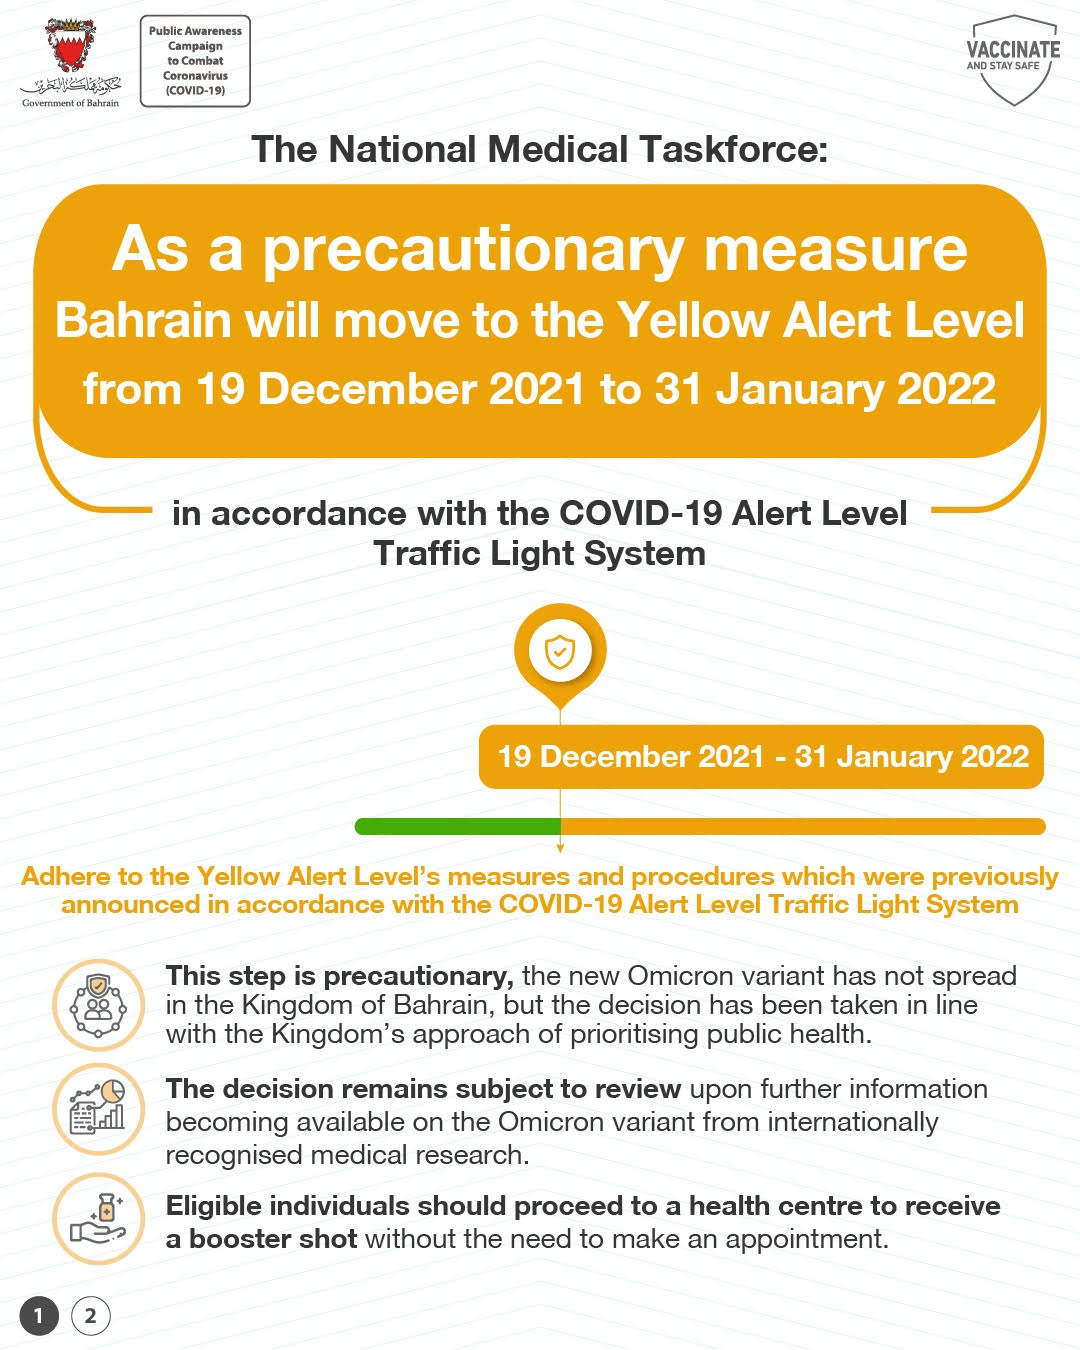 Bahrain will move to the Yellow Alert Level, as a precautionary measure, from 19 December 2021 to 31 January 2022